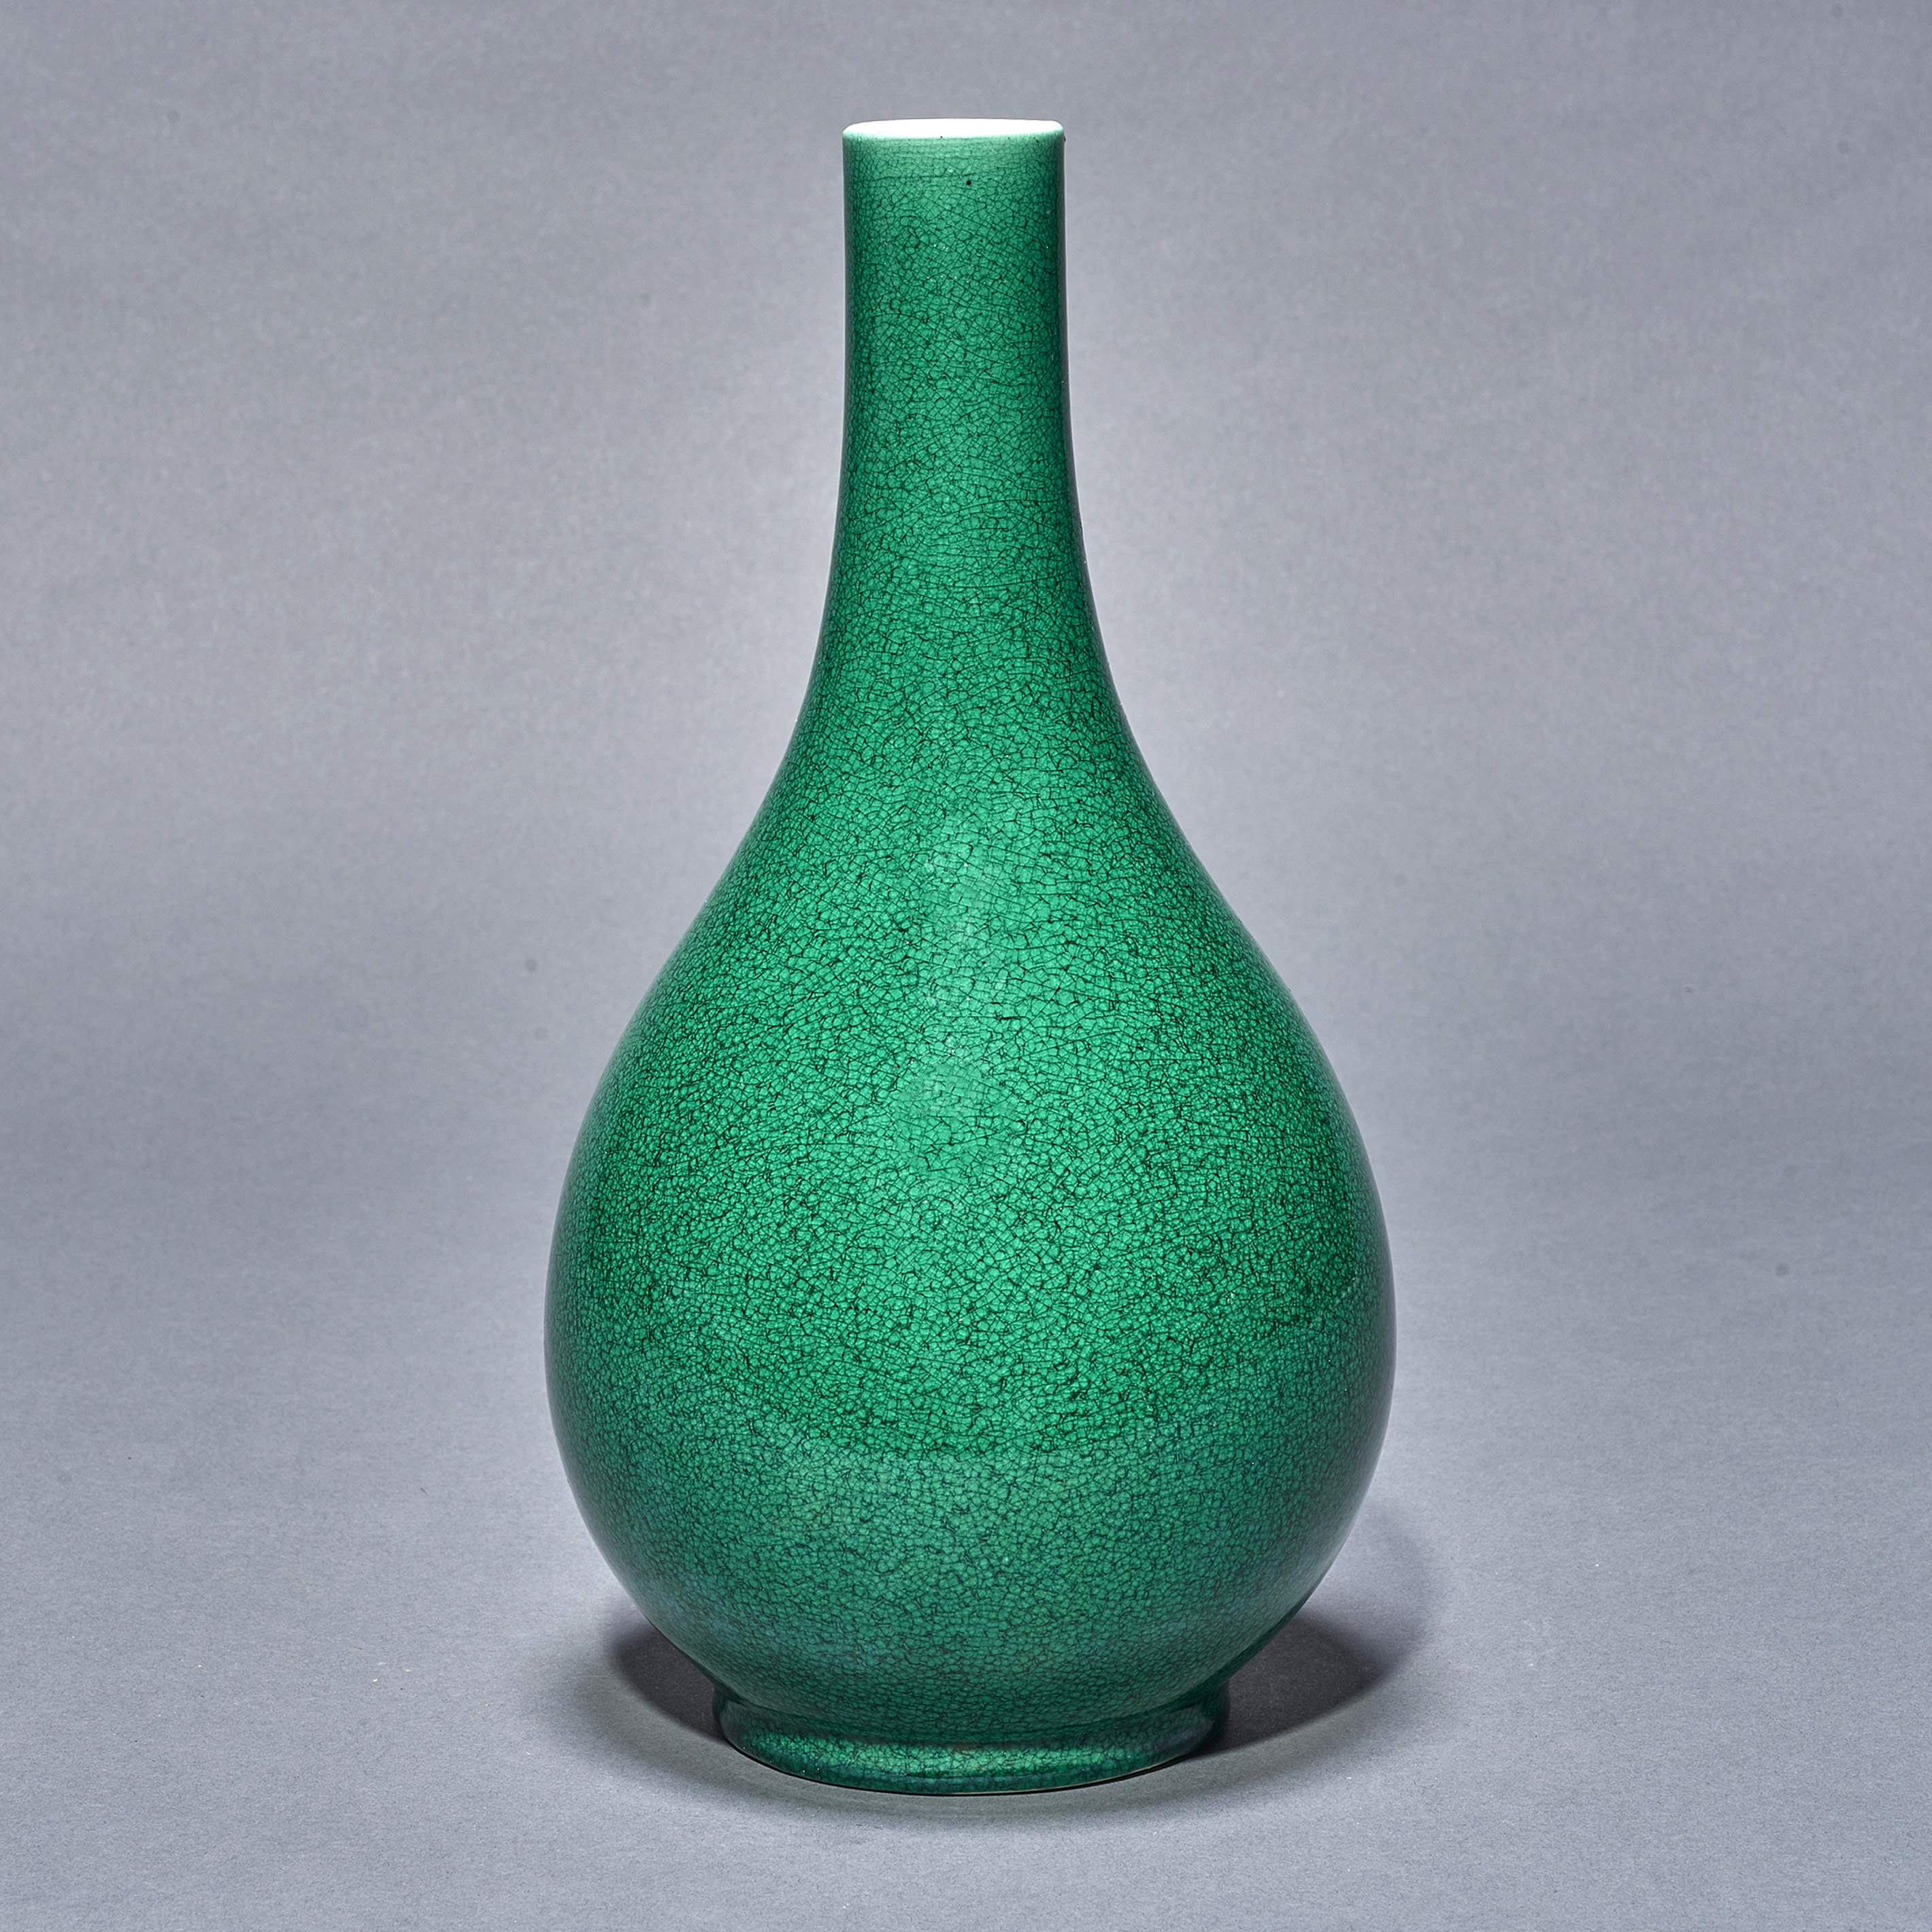 CHINESE GREEN CRACKLE GLAZED VASE 3a4317